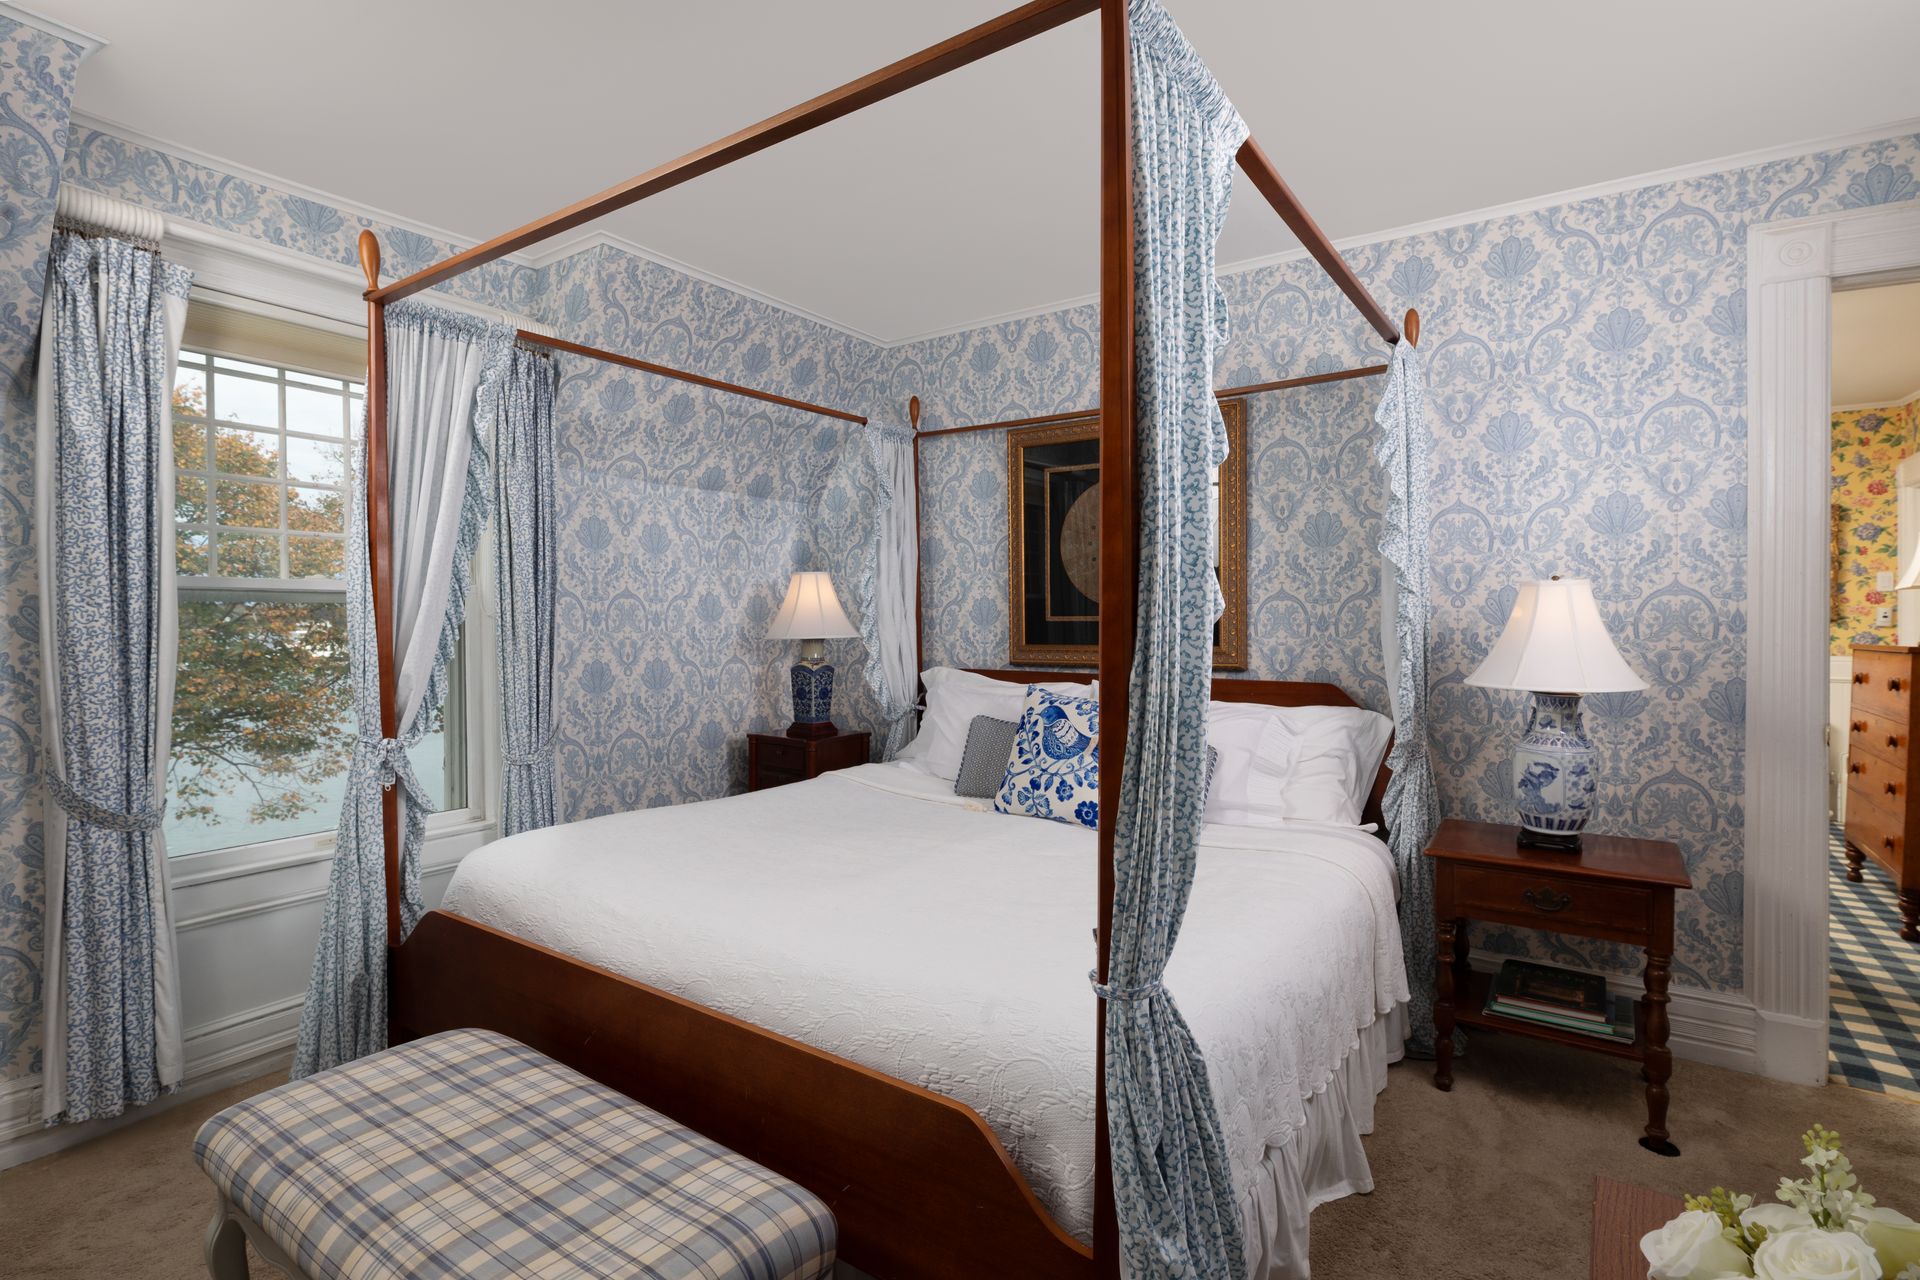 A bedroom with a four poster bed and blue and white wallpaper